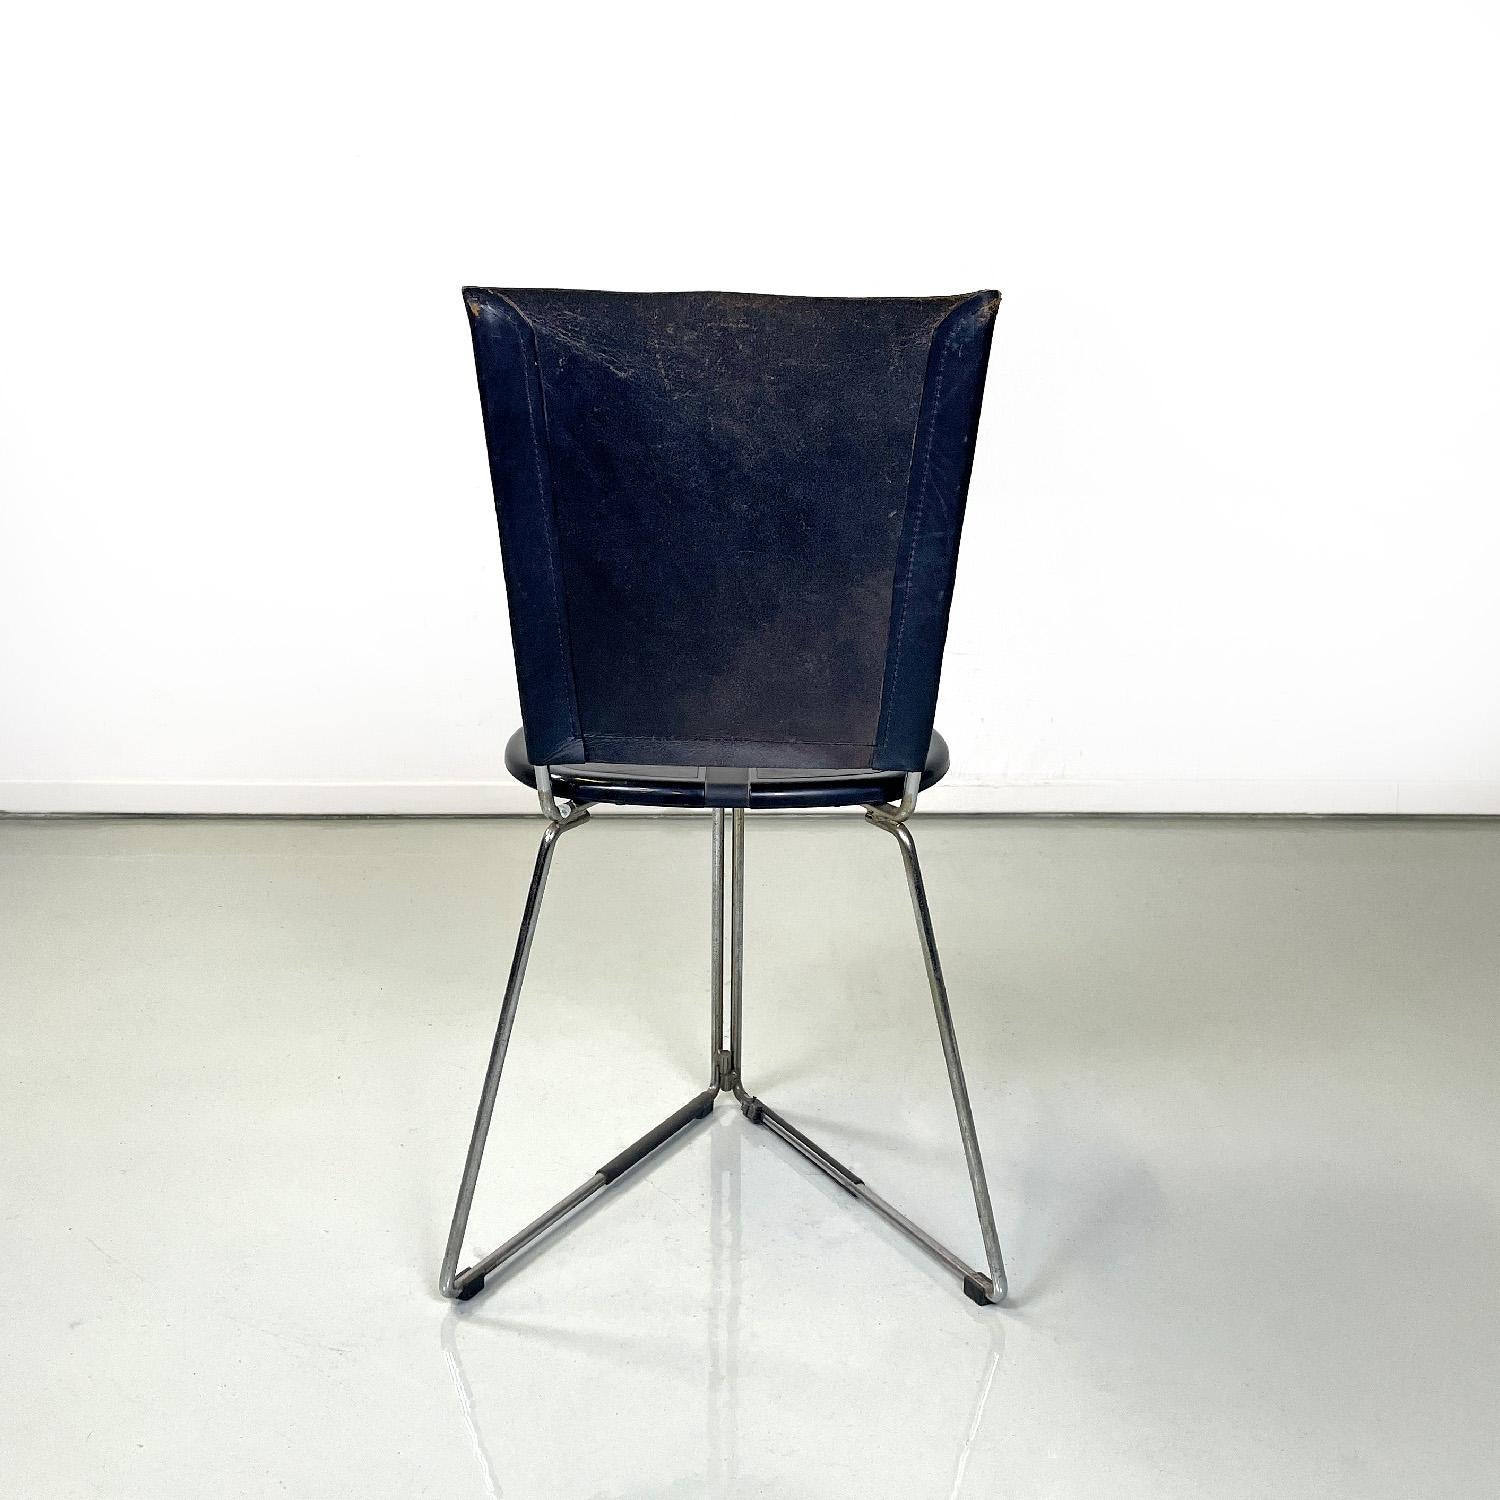 Late 20th Century Italian modern black chair Terna by Gaspare Cairoli for Seccose, 1980s For Sale